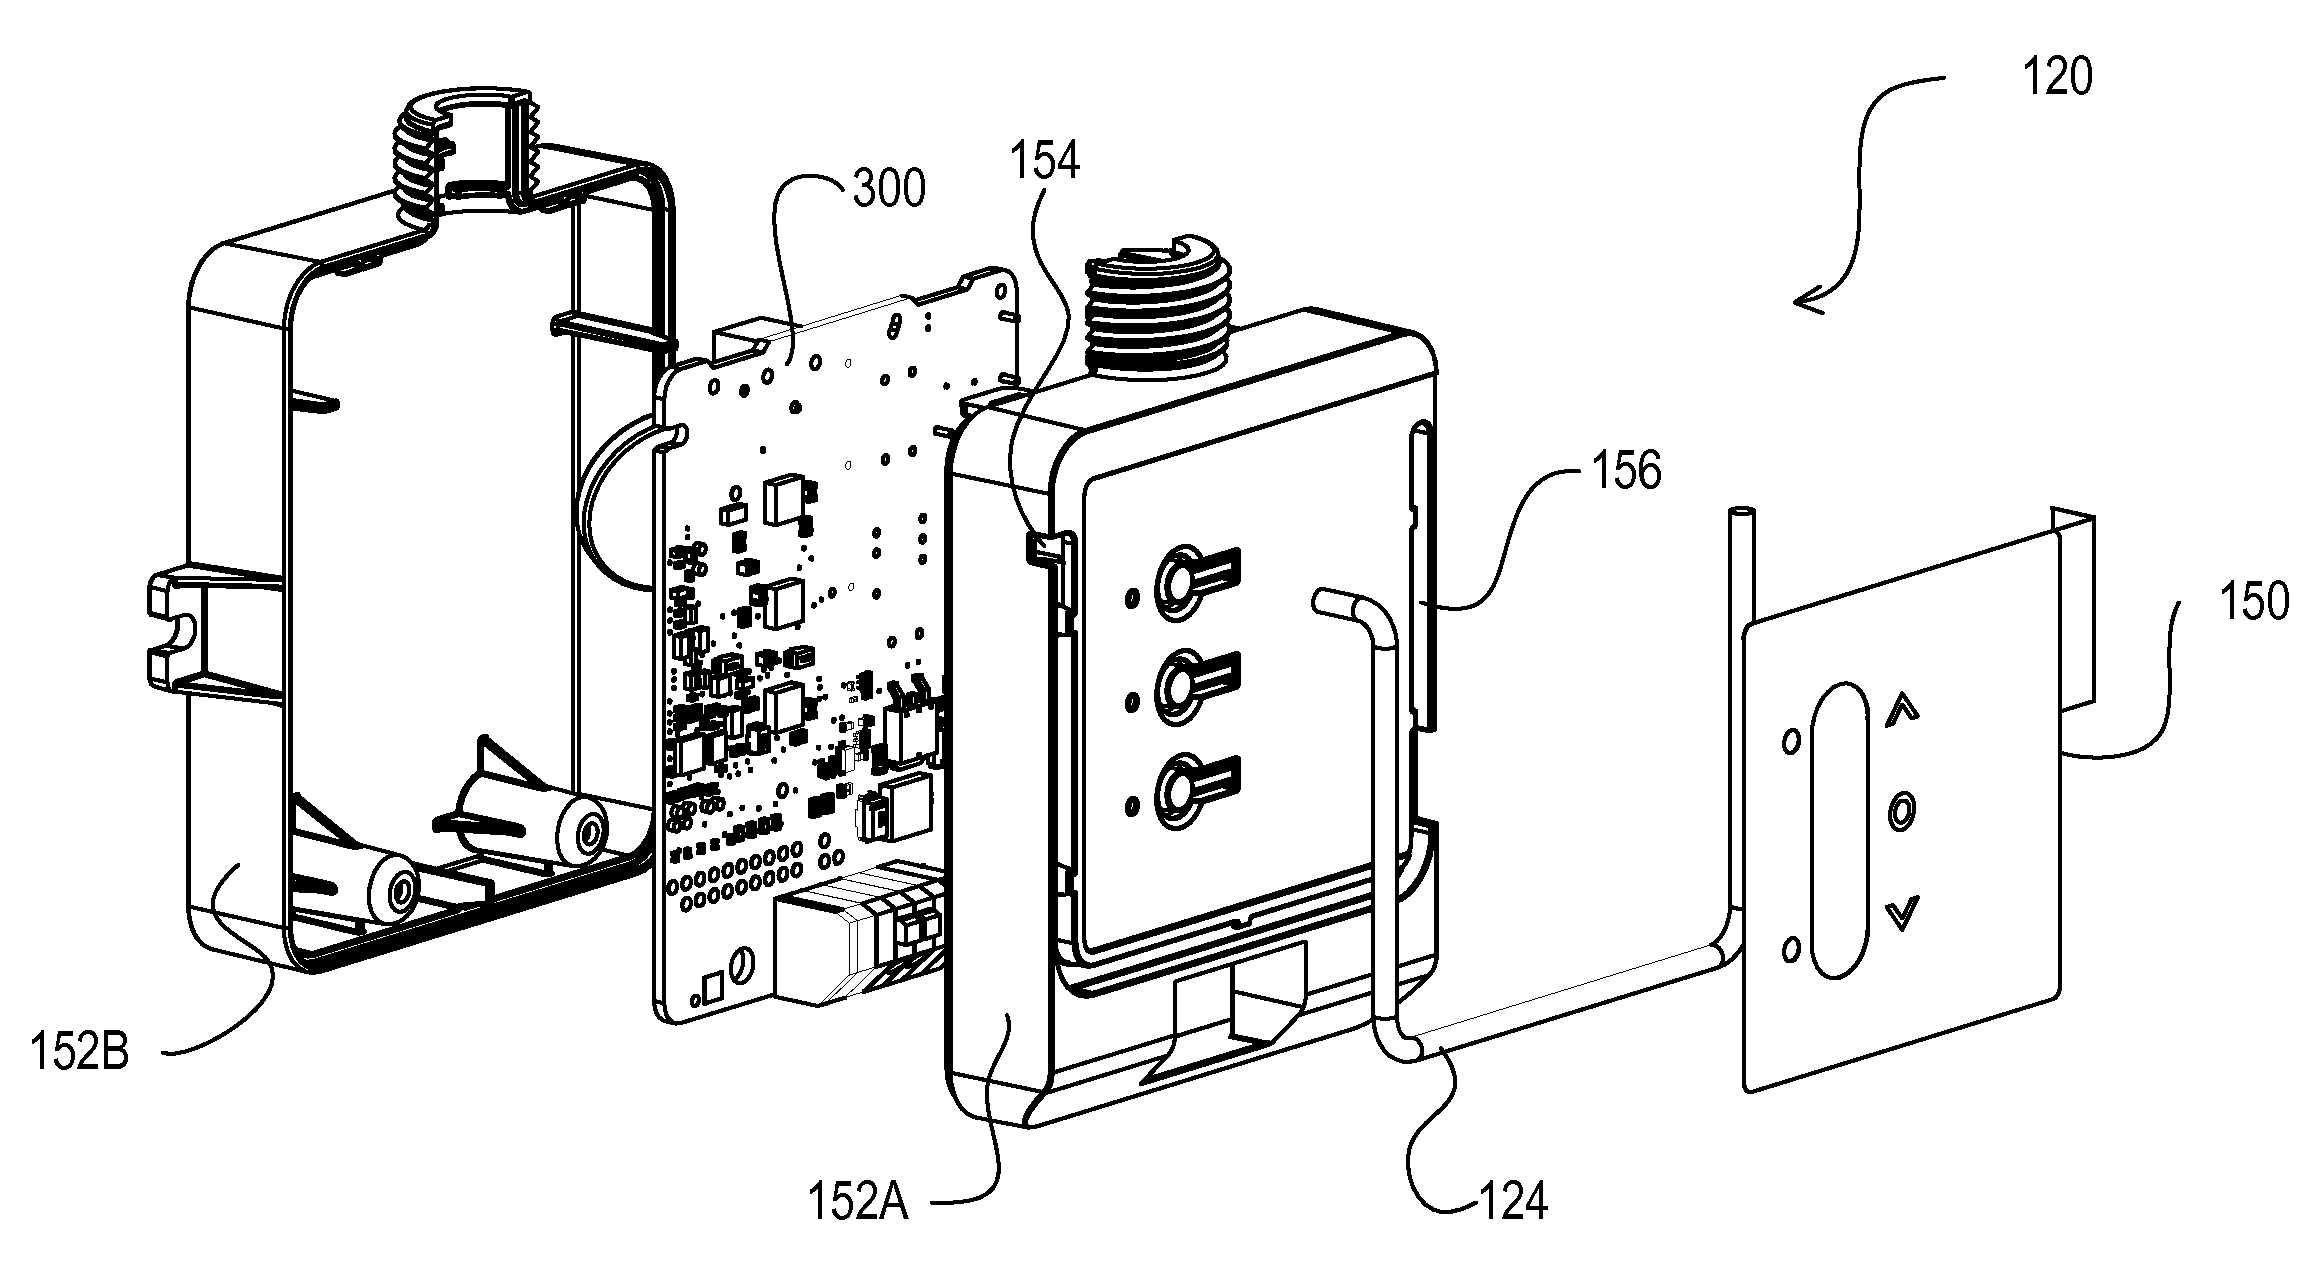 Load control device having an electrically isolated antenna